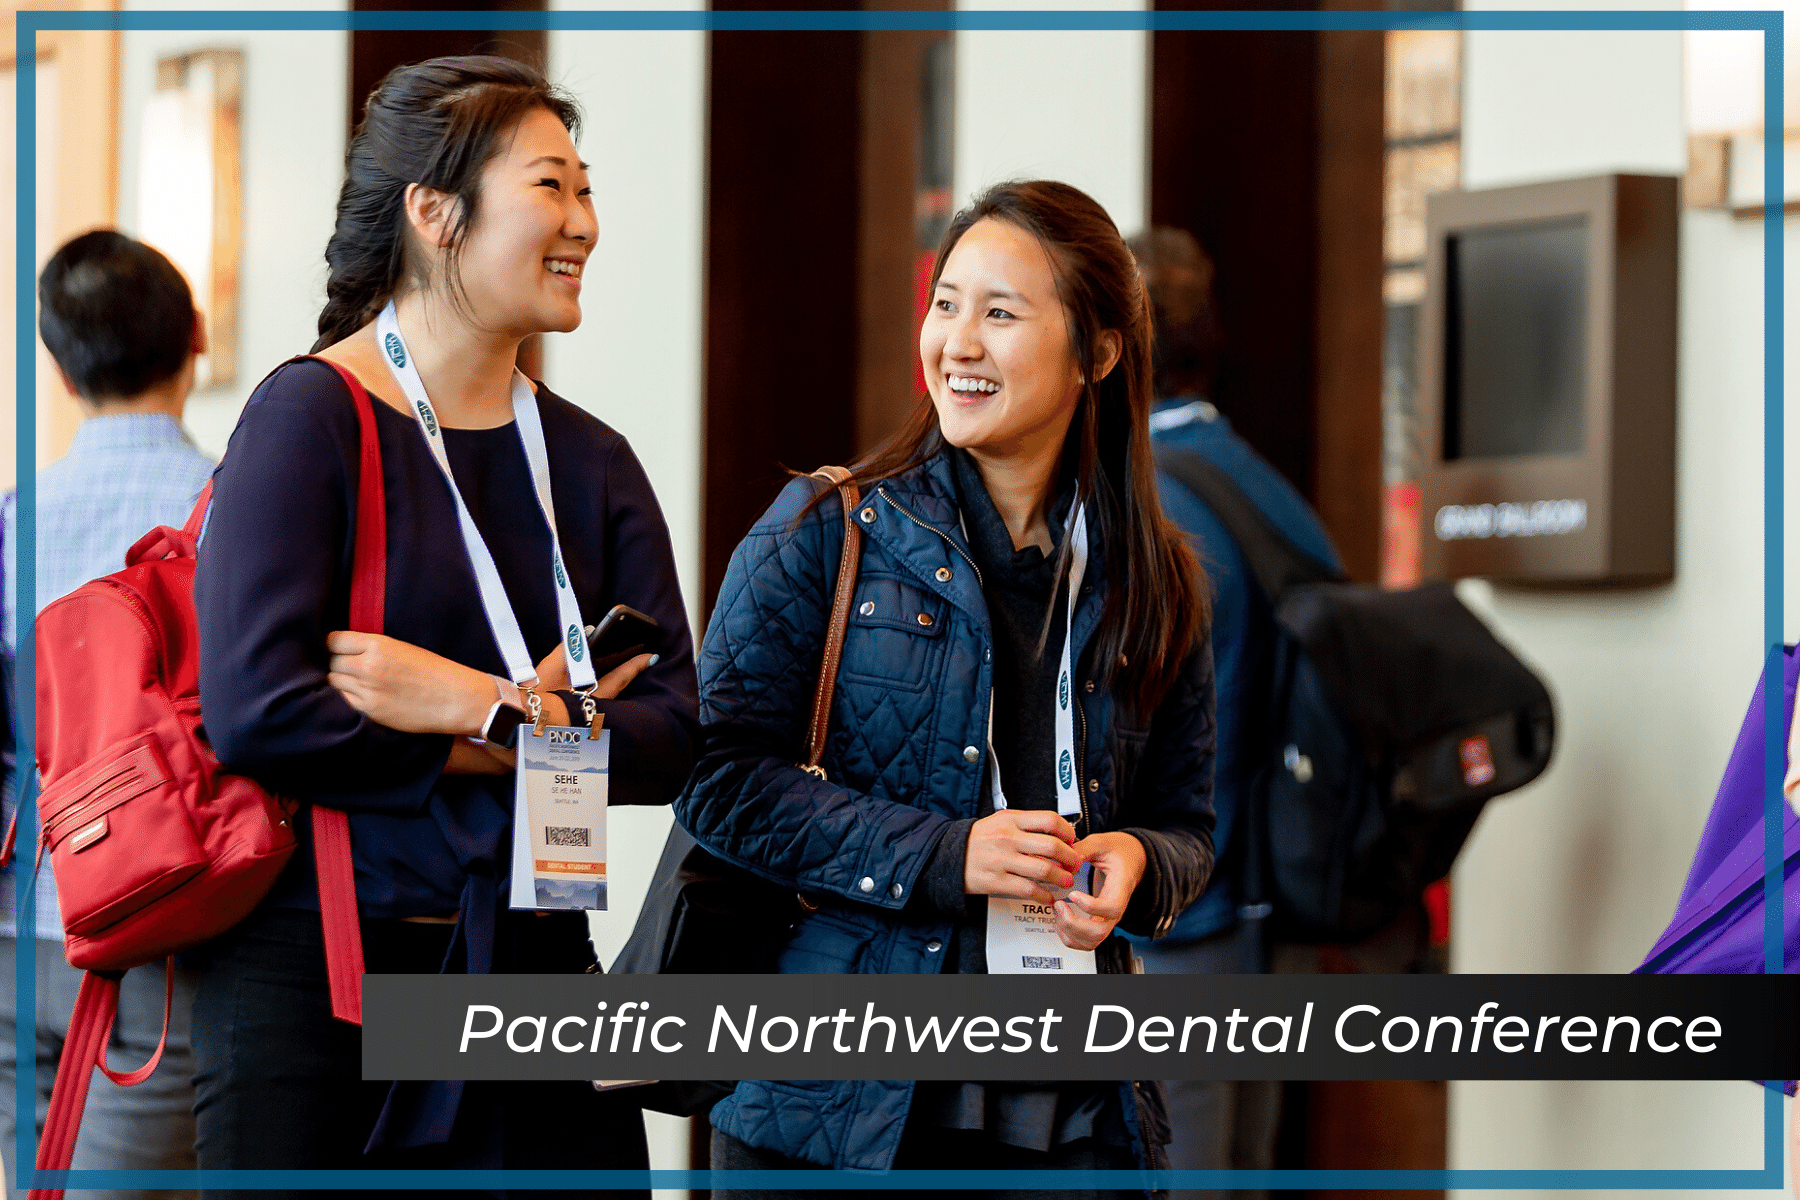 Pacific Northwest Dental Conference